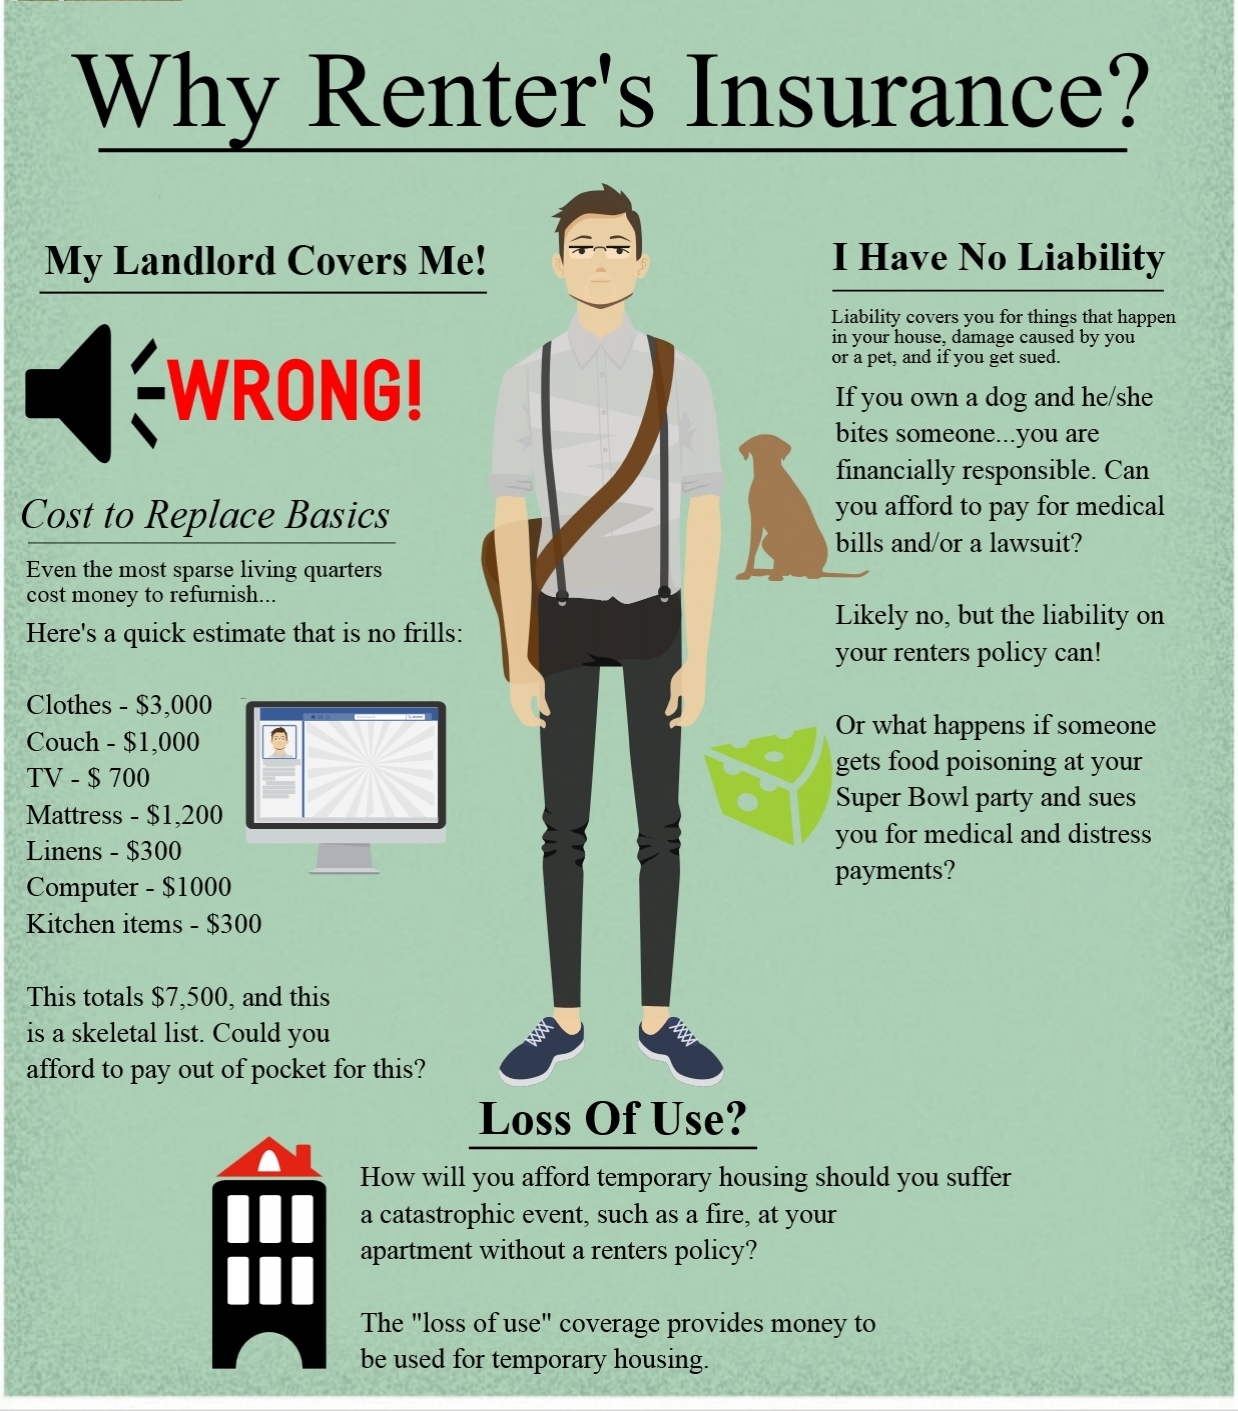 Renter's Insurance - Why?